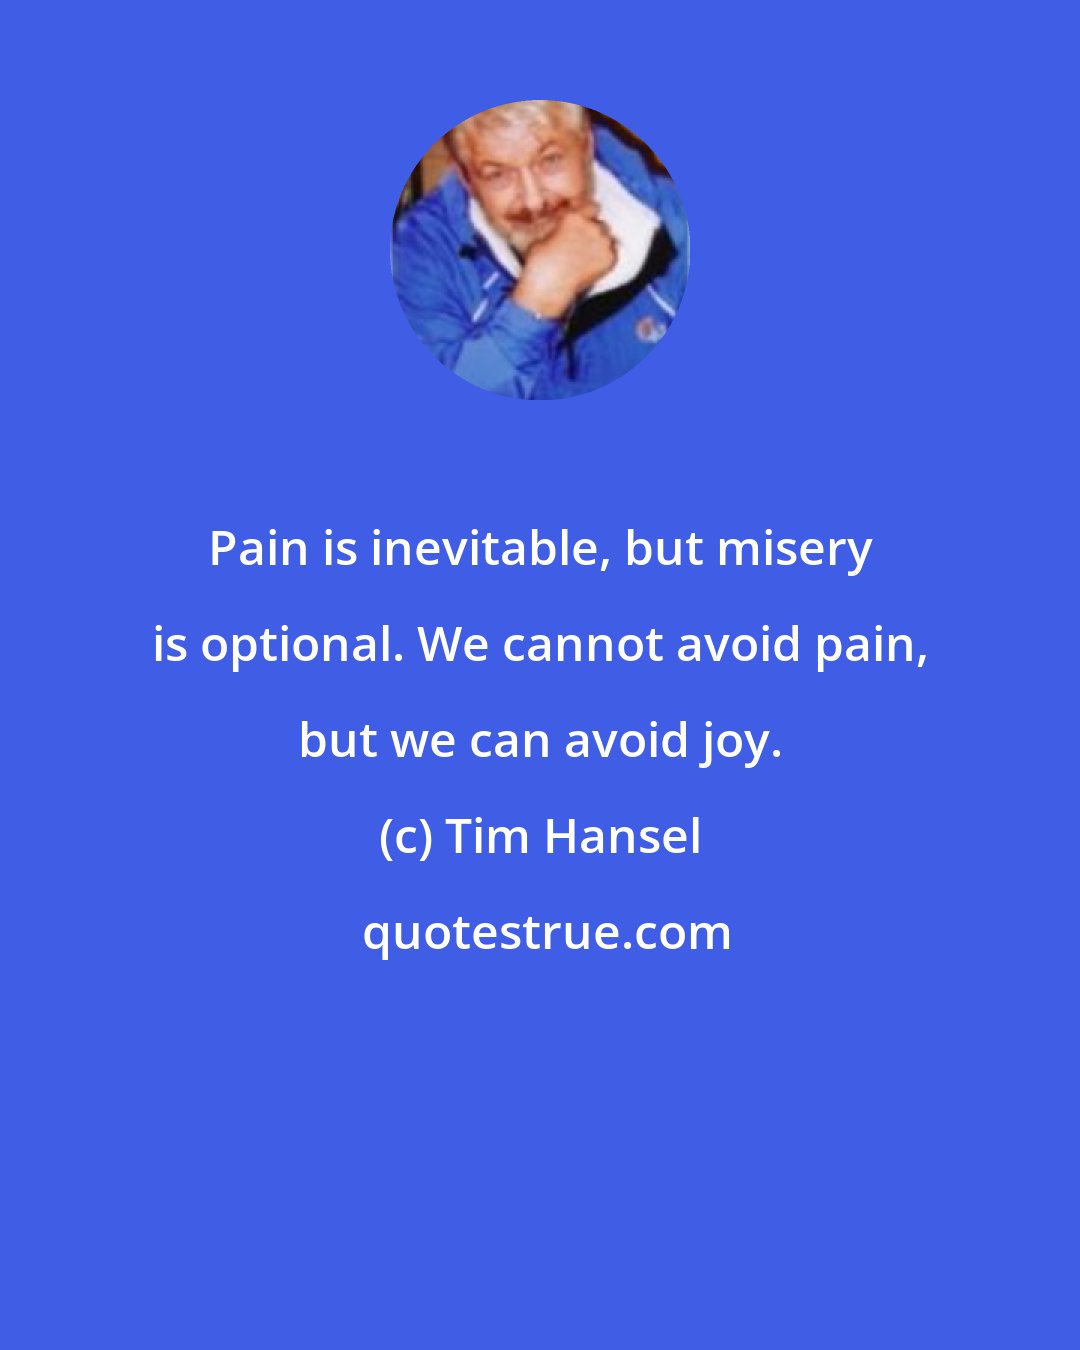 Tim Hansel: Pain is inevitable, but misery is optional. We cannot avoid pain, but we can avoid joy.